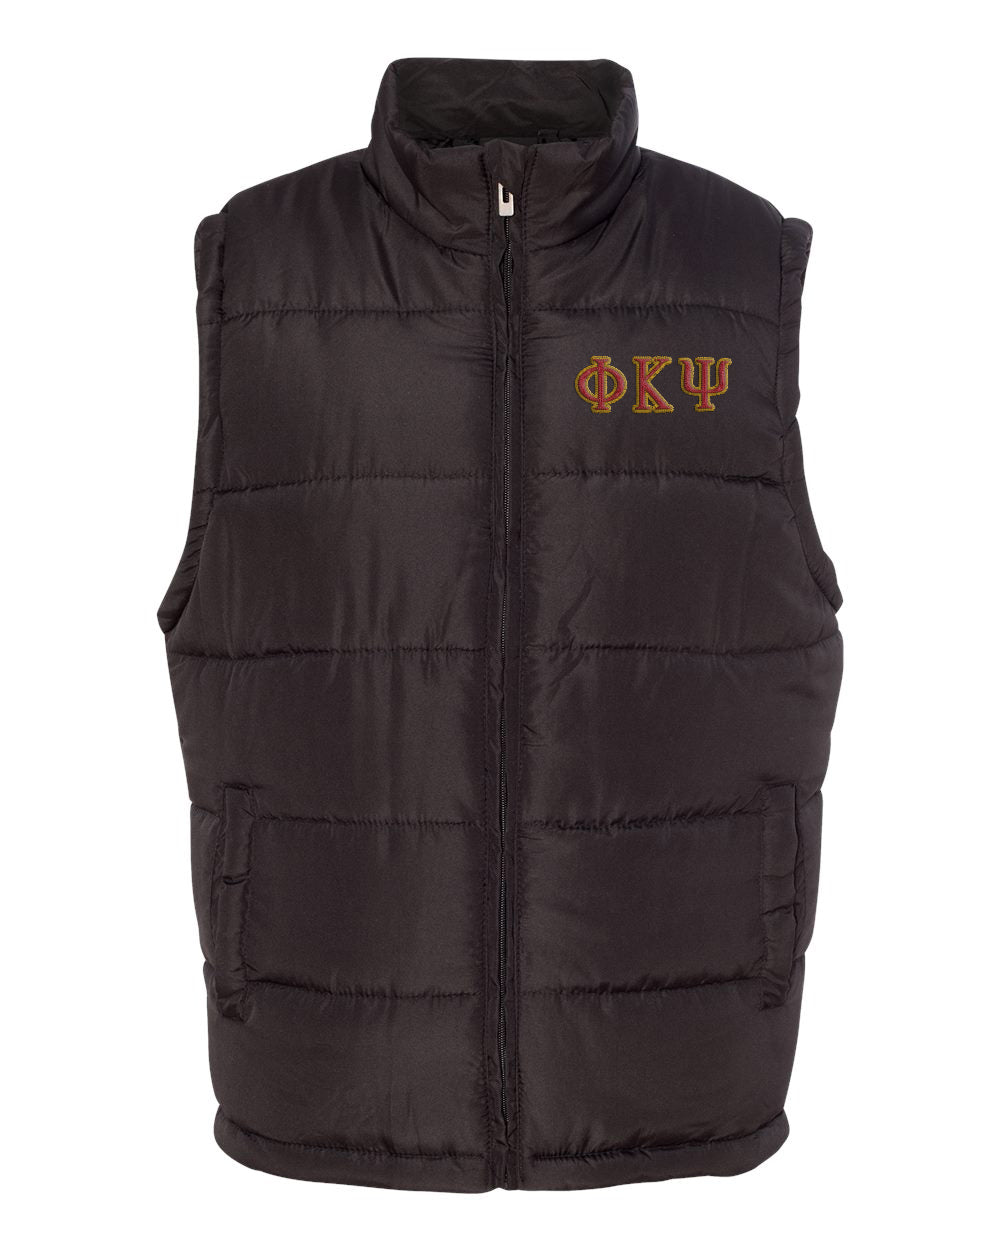 Phi Kappa Psi Embroidered Puffer Vest